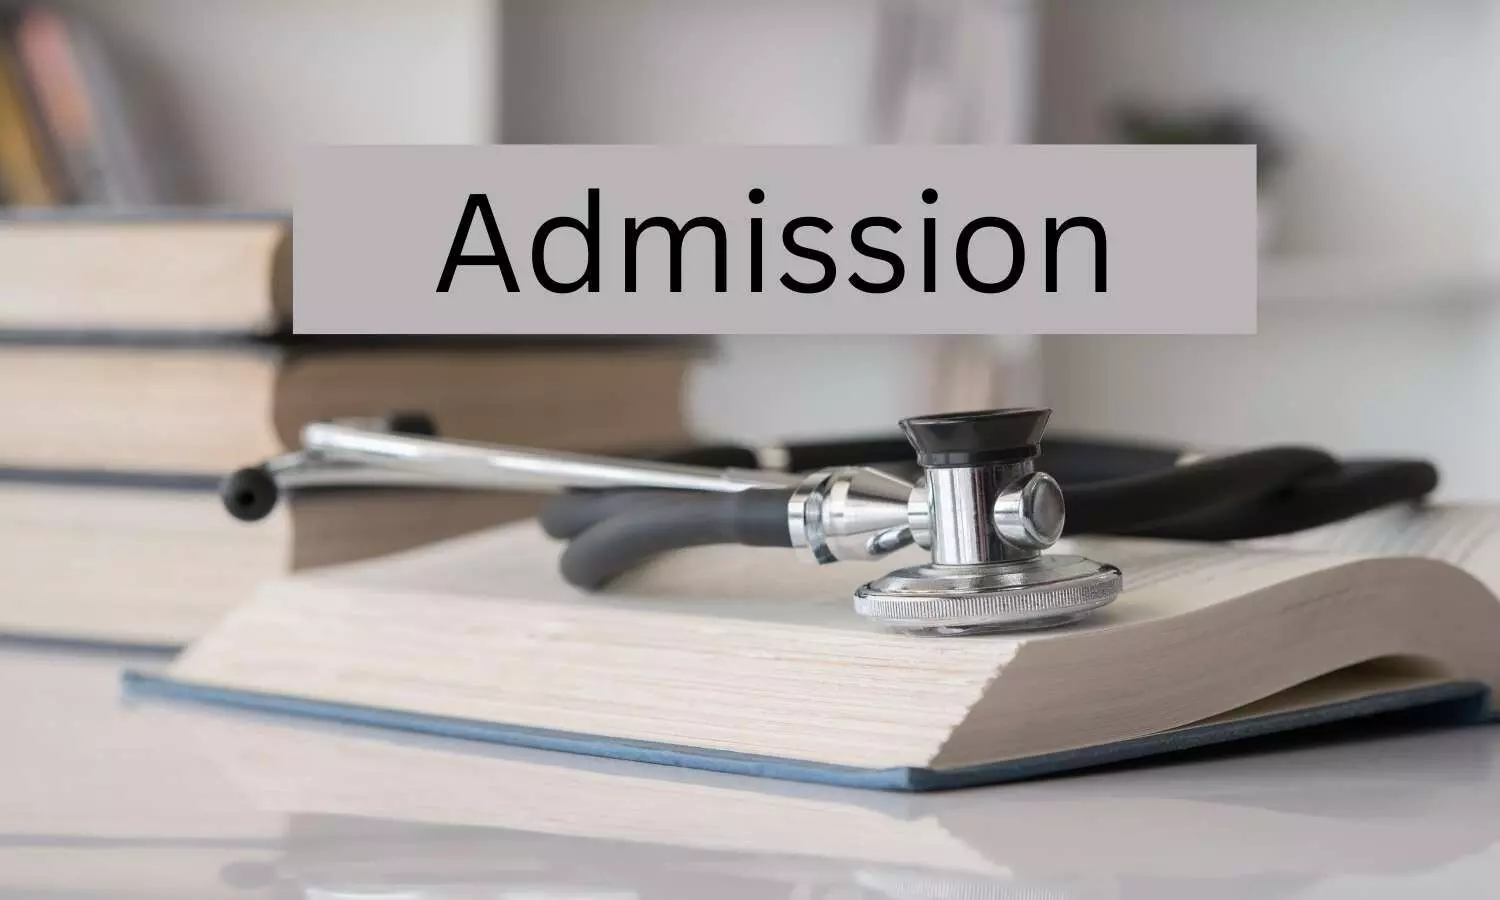 DME Gujarat Releases Revised Schedule For Fee Payment, Admission Process Of 2nd Round For Bsc Nursing, GNM, ANM Courses